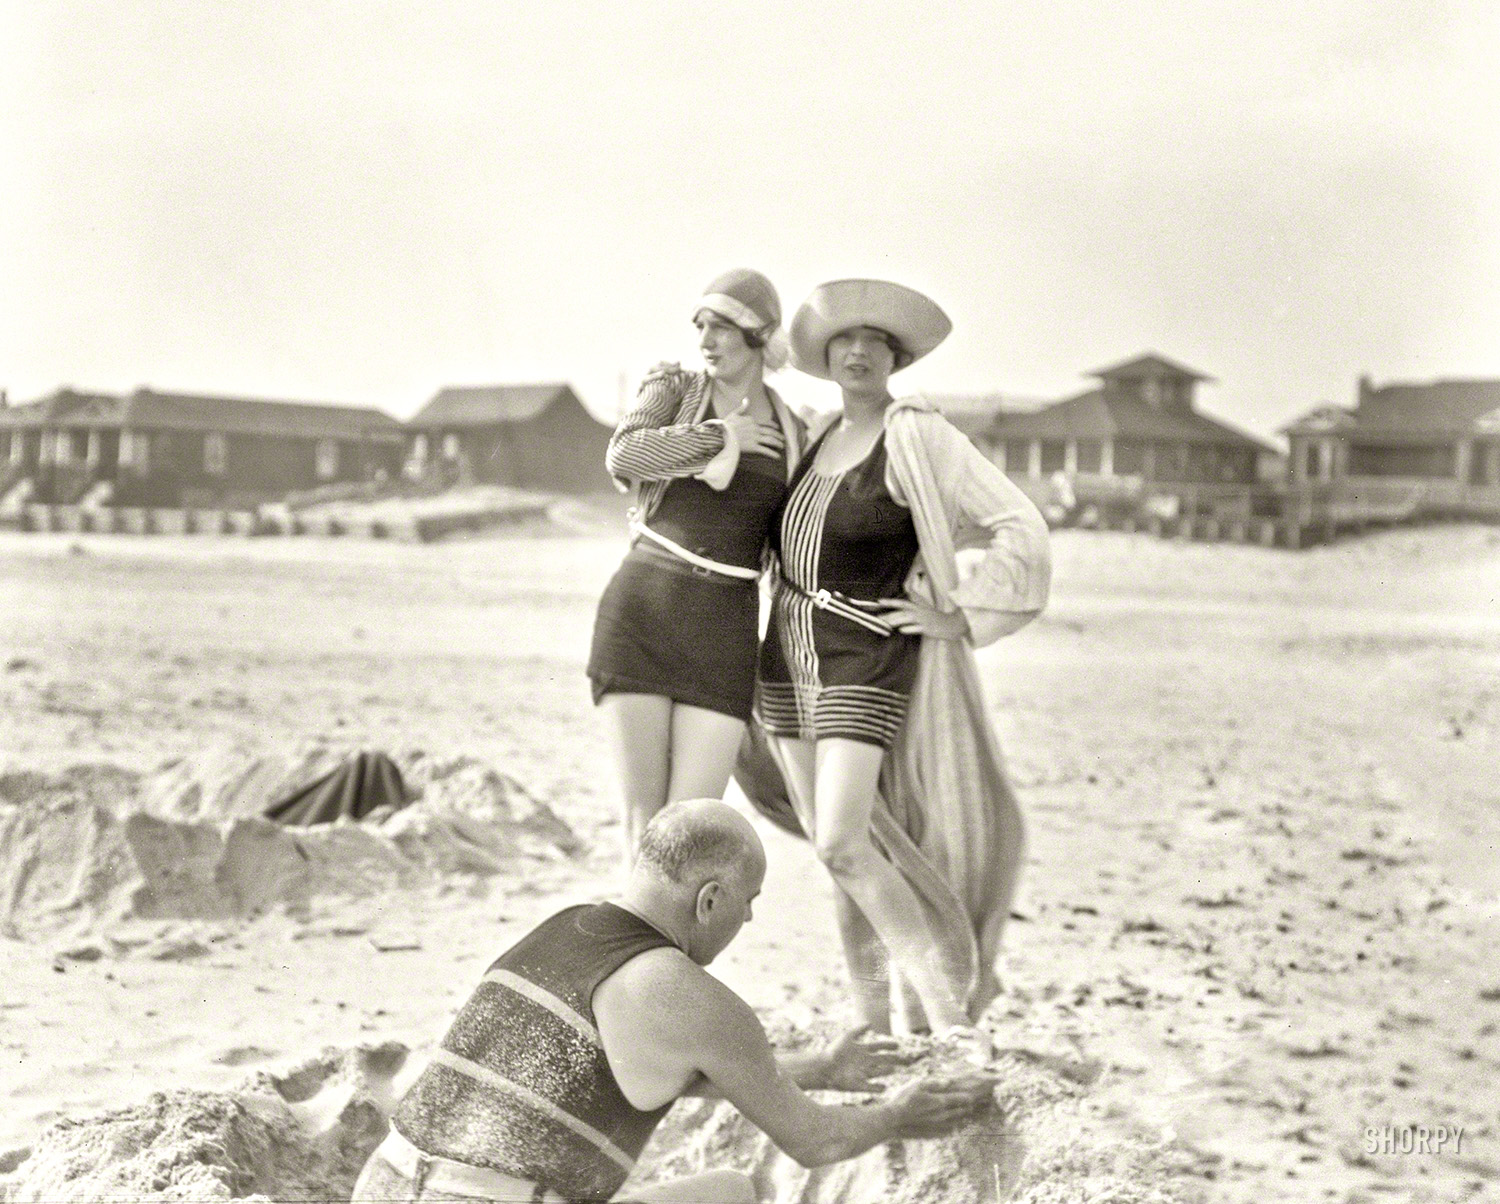 Circa 1920s. "Man building sand castle and two unidentified women. Long Beach, New York." 4x5 nitrate negative by Arnold Genthe. View full size.